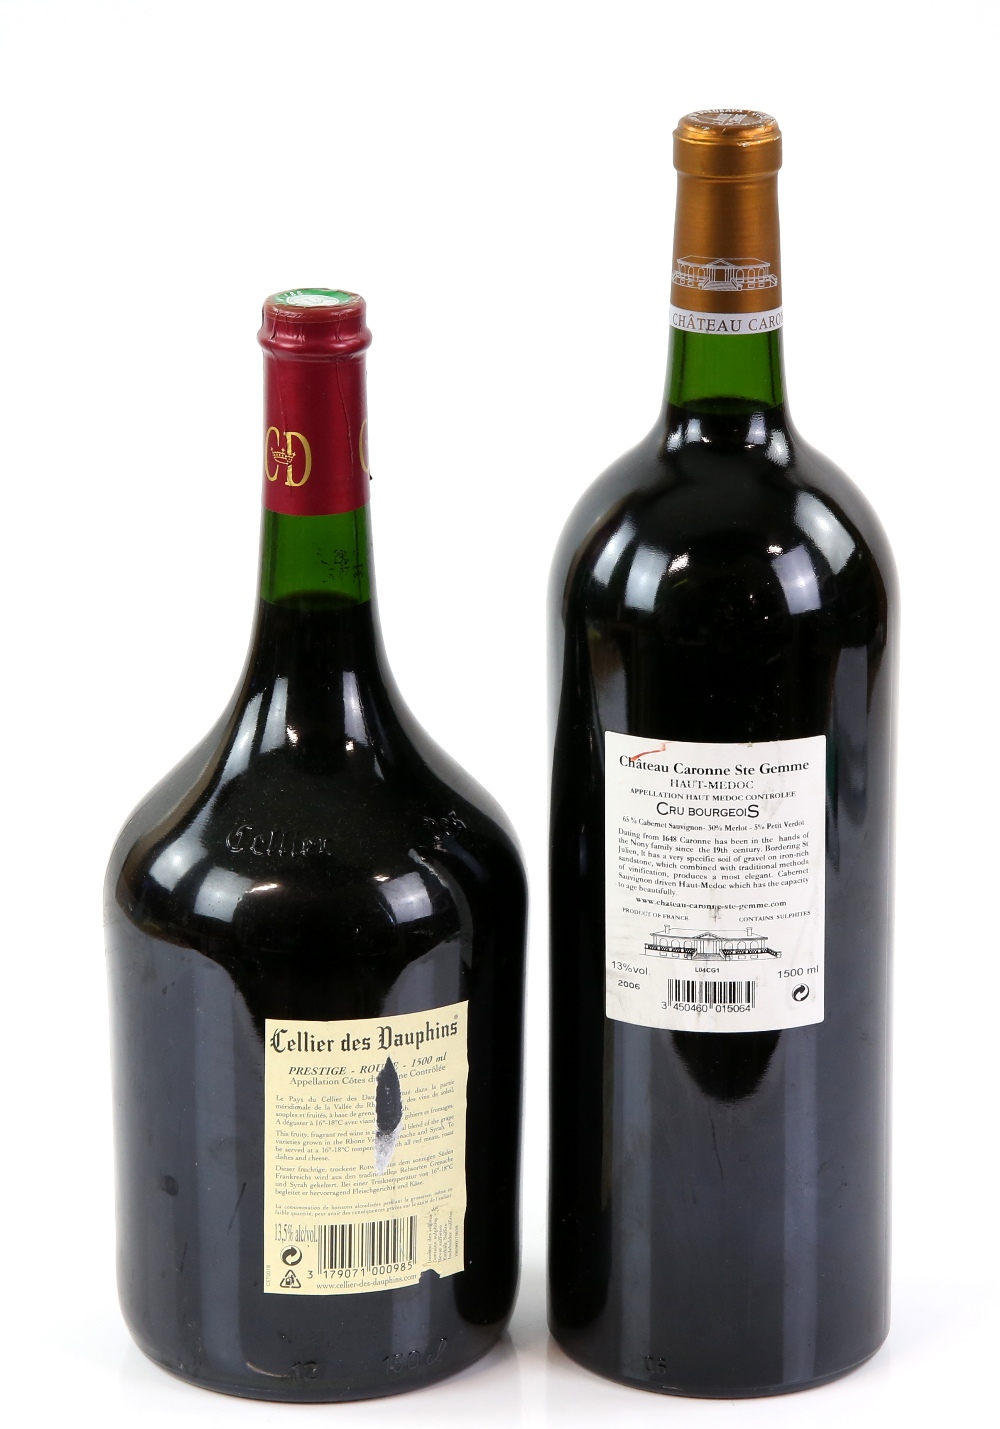 Two Magnums of red wine, one Chateau Caronnes Ste Gemme 2006 vintage, one Cellier des Dauphins Cotes - Image 2 of 2